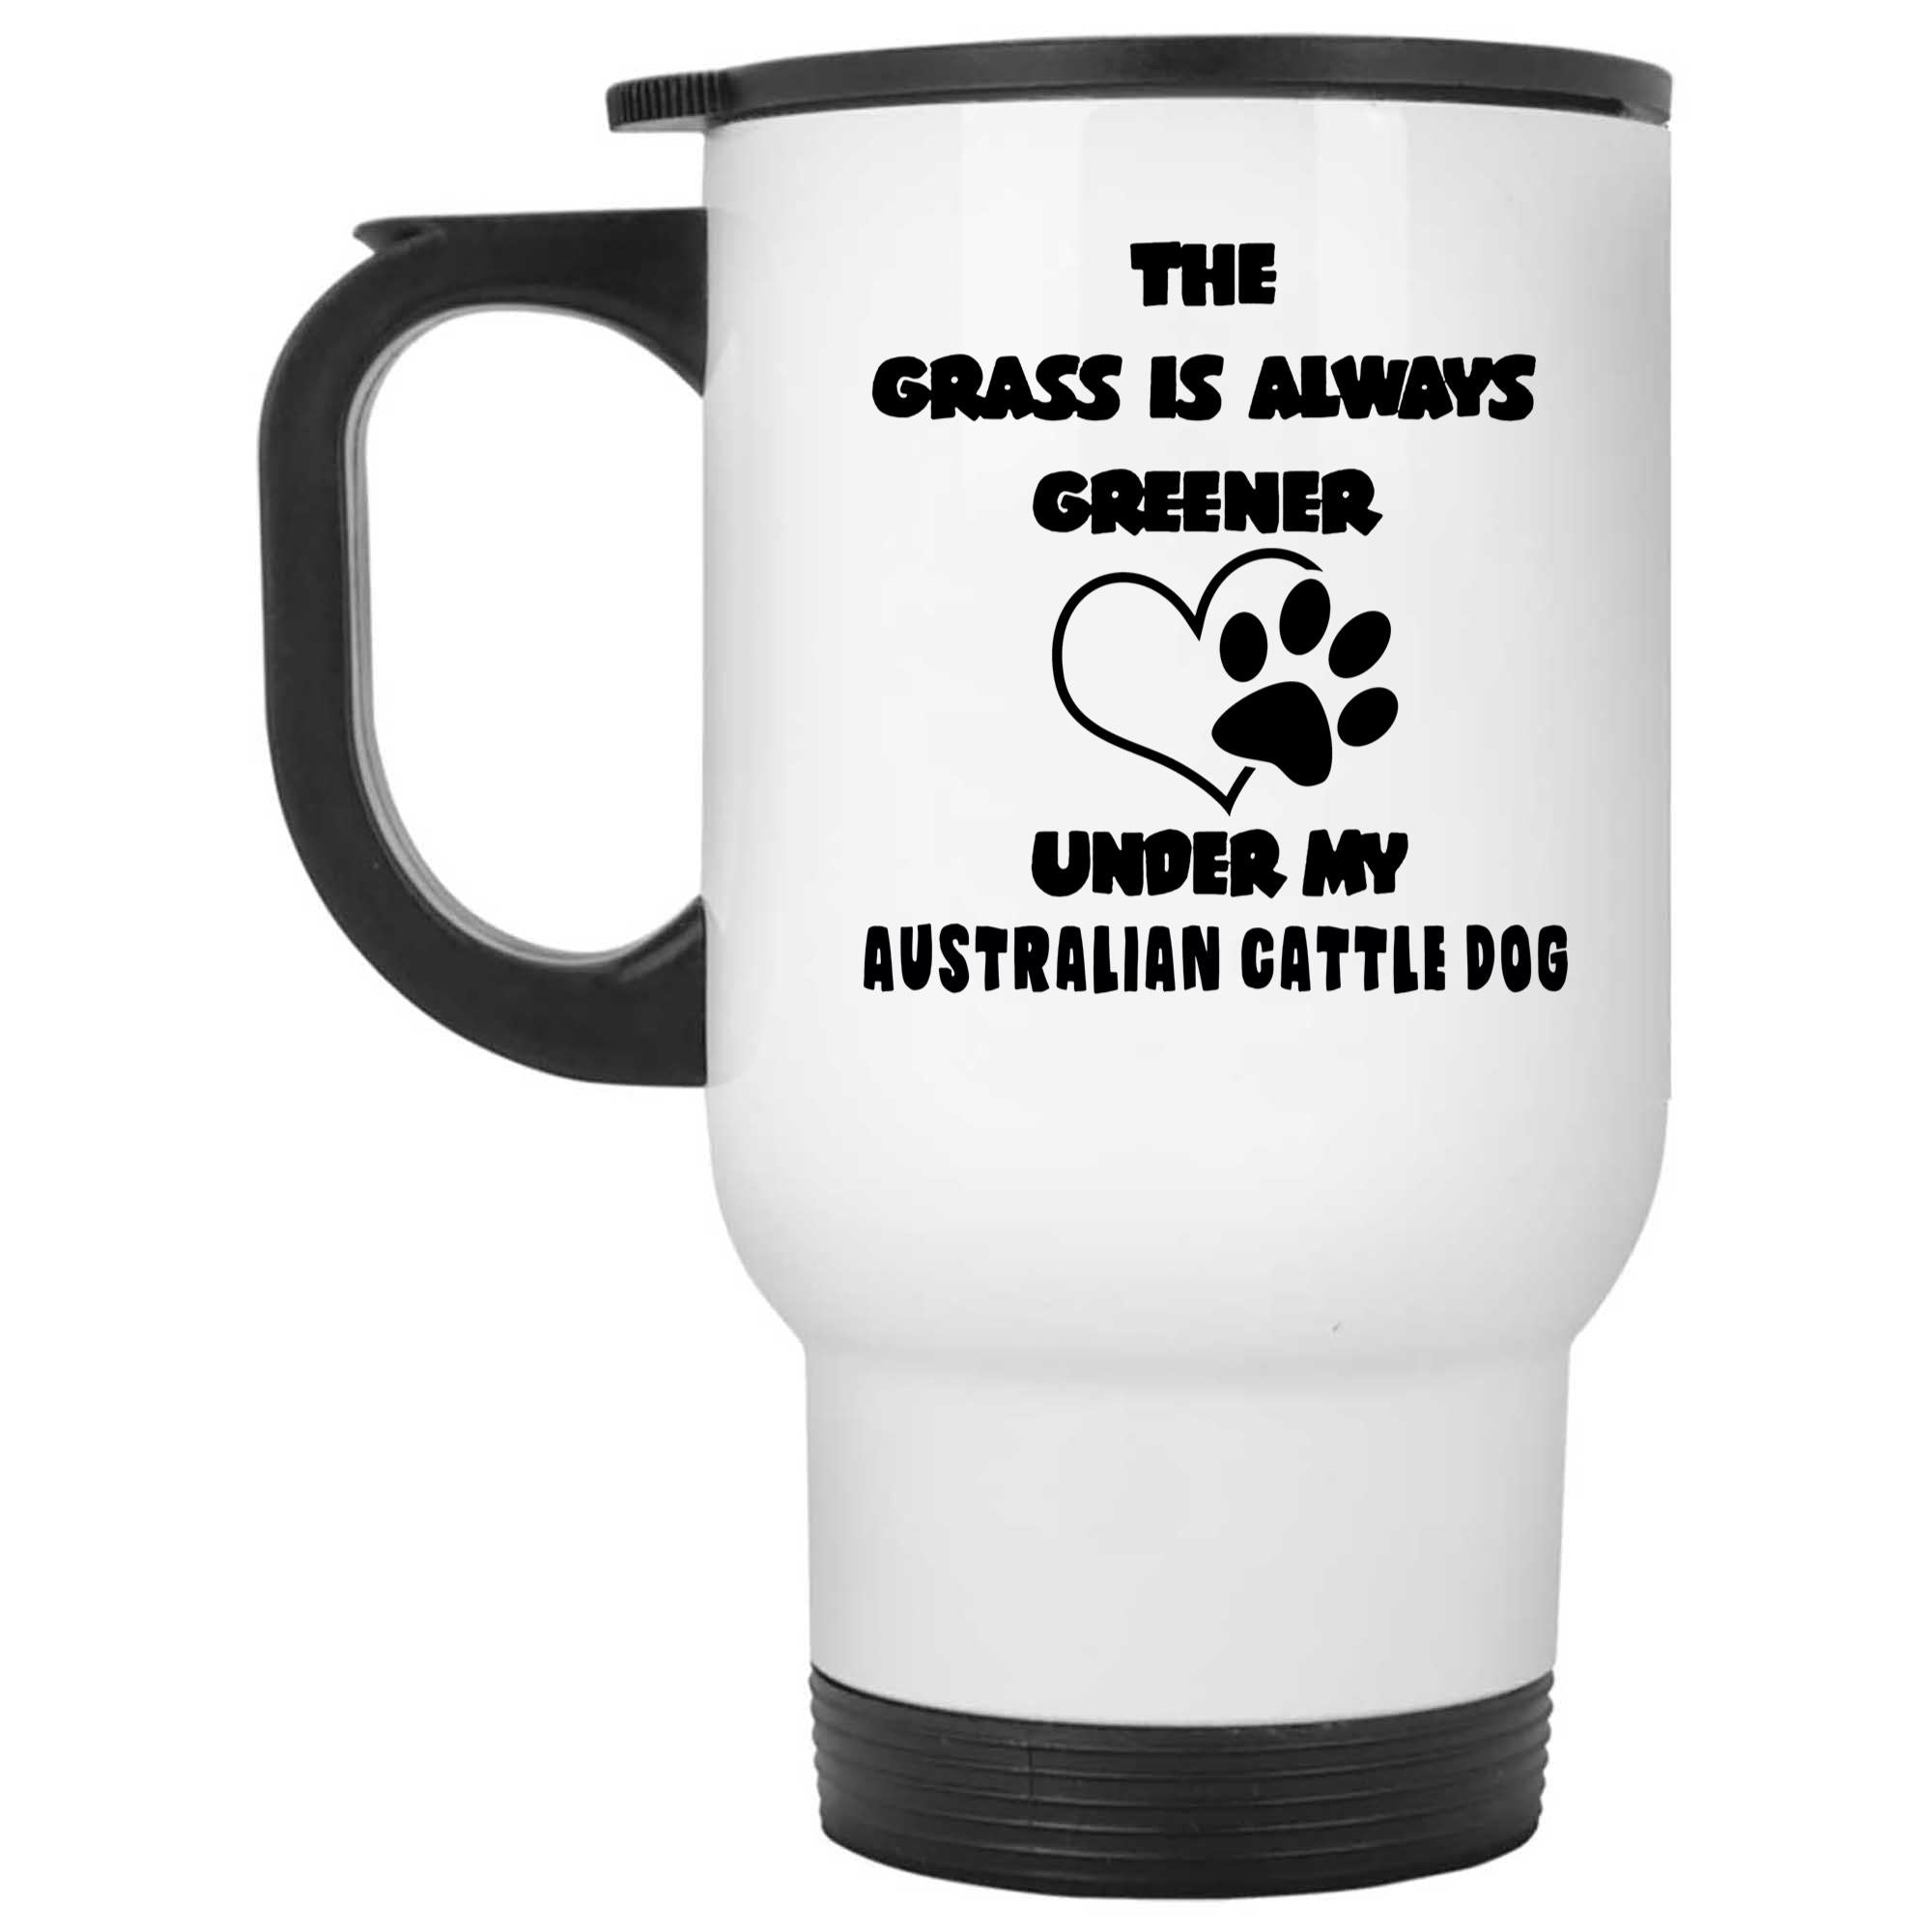 Skitons Funny Ceramic Novelty Coffee Mug The Grass Is Always Greener Under My Australian Cattle Dog Dog Funny Sarcastic, Dog Lover 8TIS96y